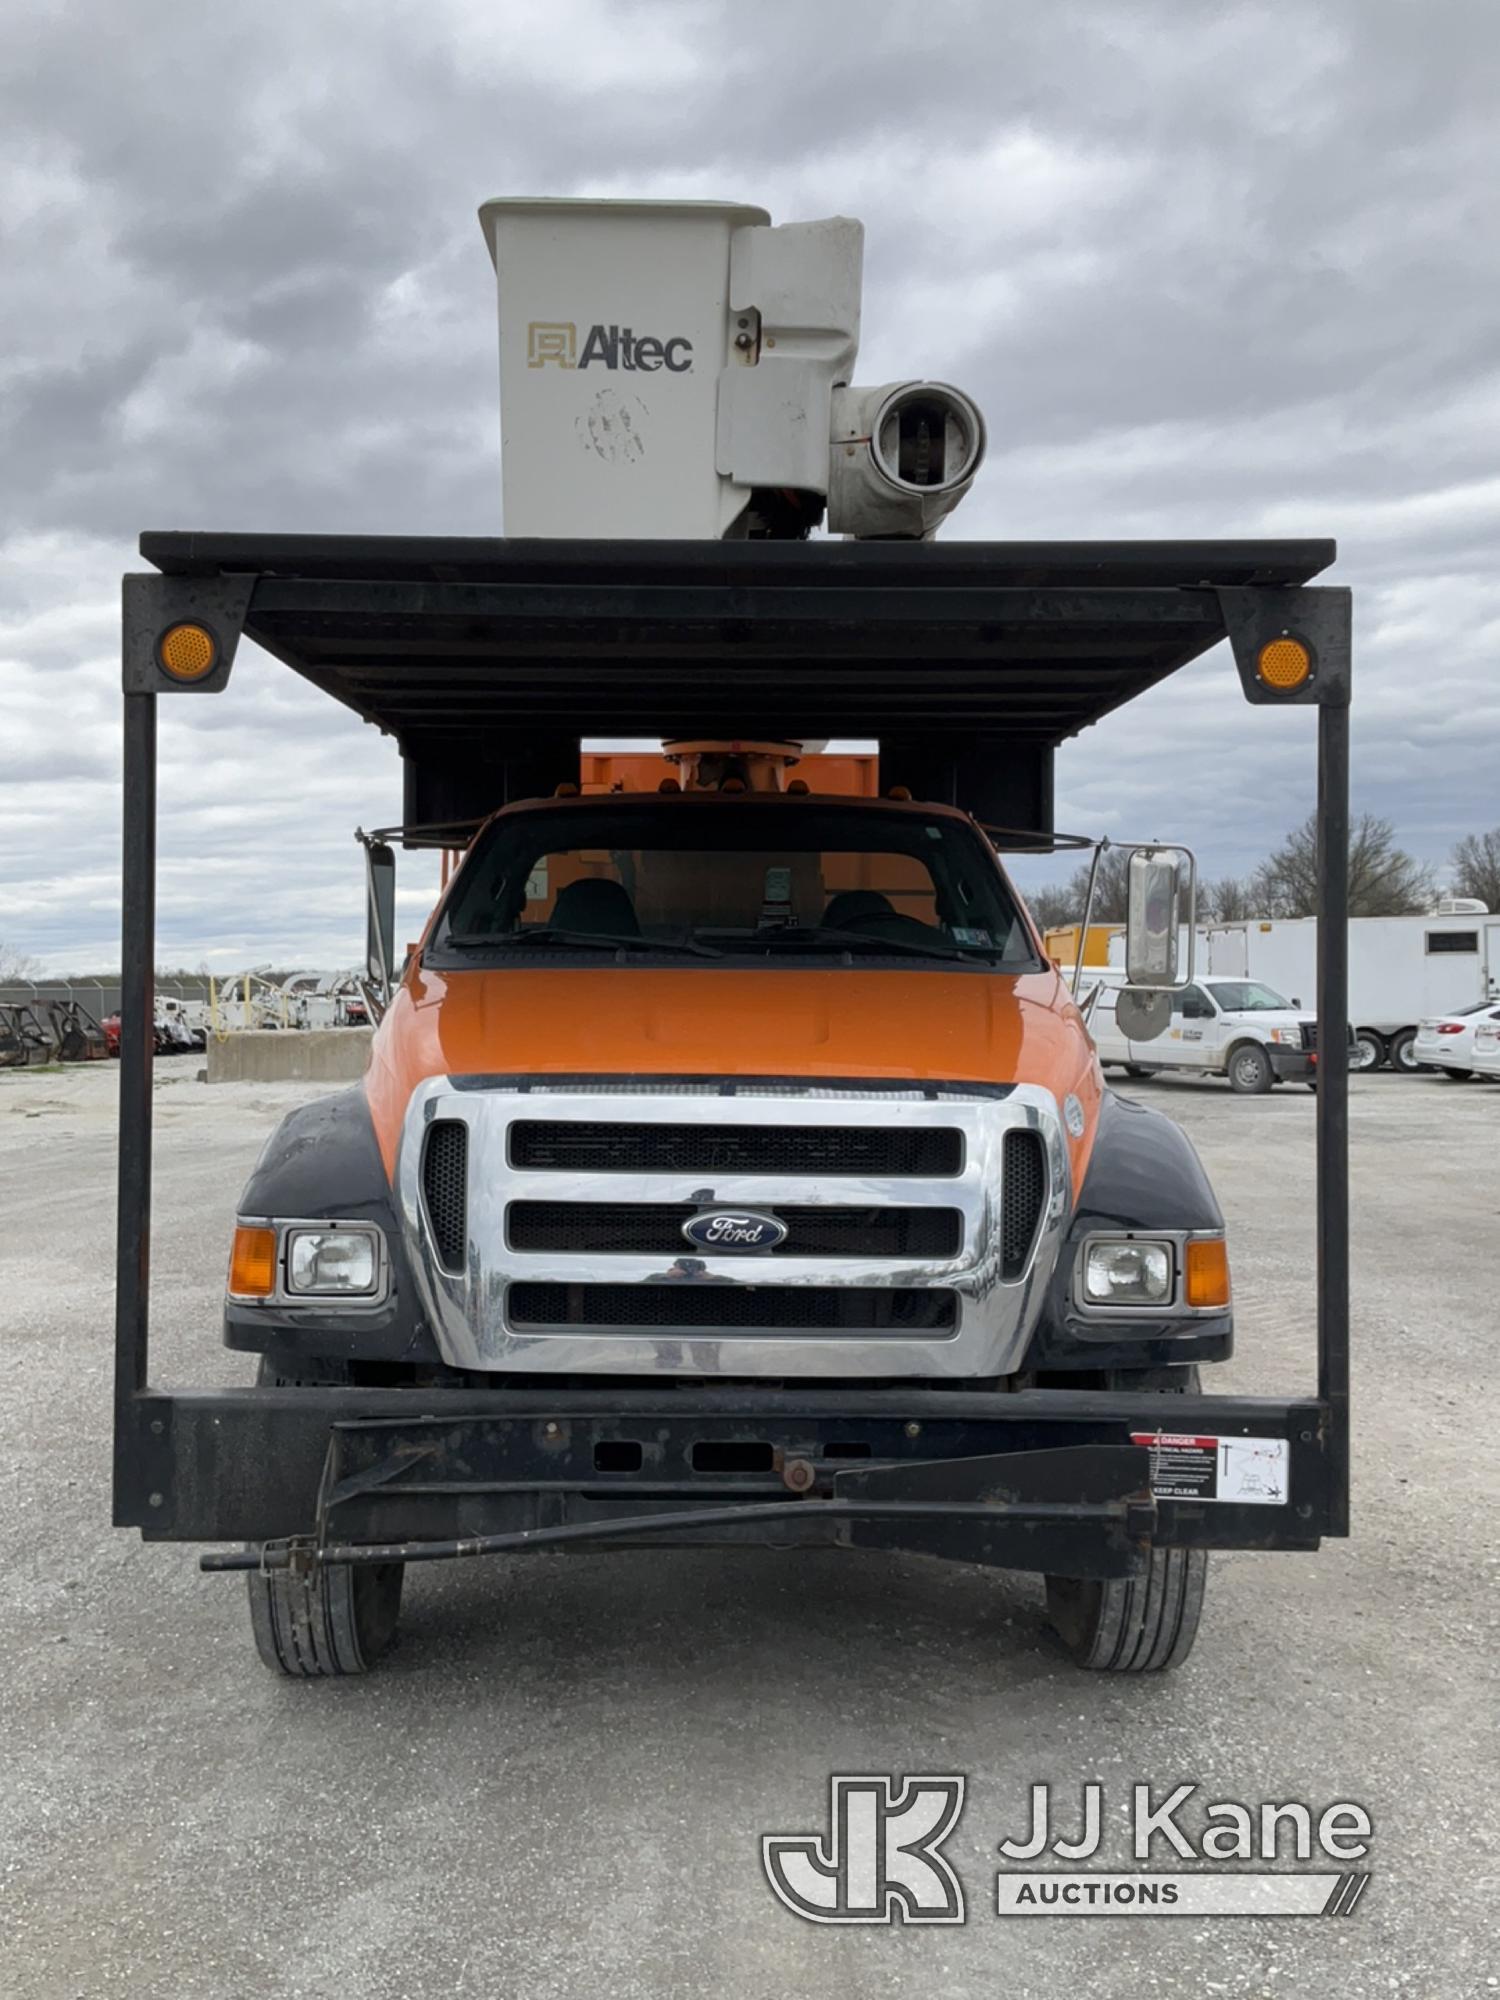 (Hawk Point, MO) Altec LR760-E70, Over-Center Elevator Bucket Truck mounted behind cab on 2013 Ford